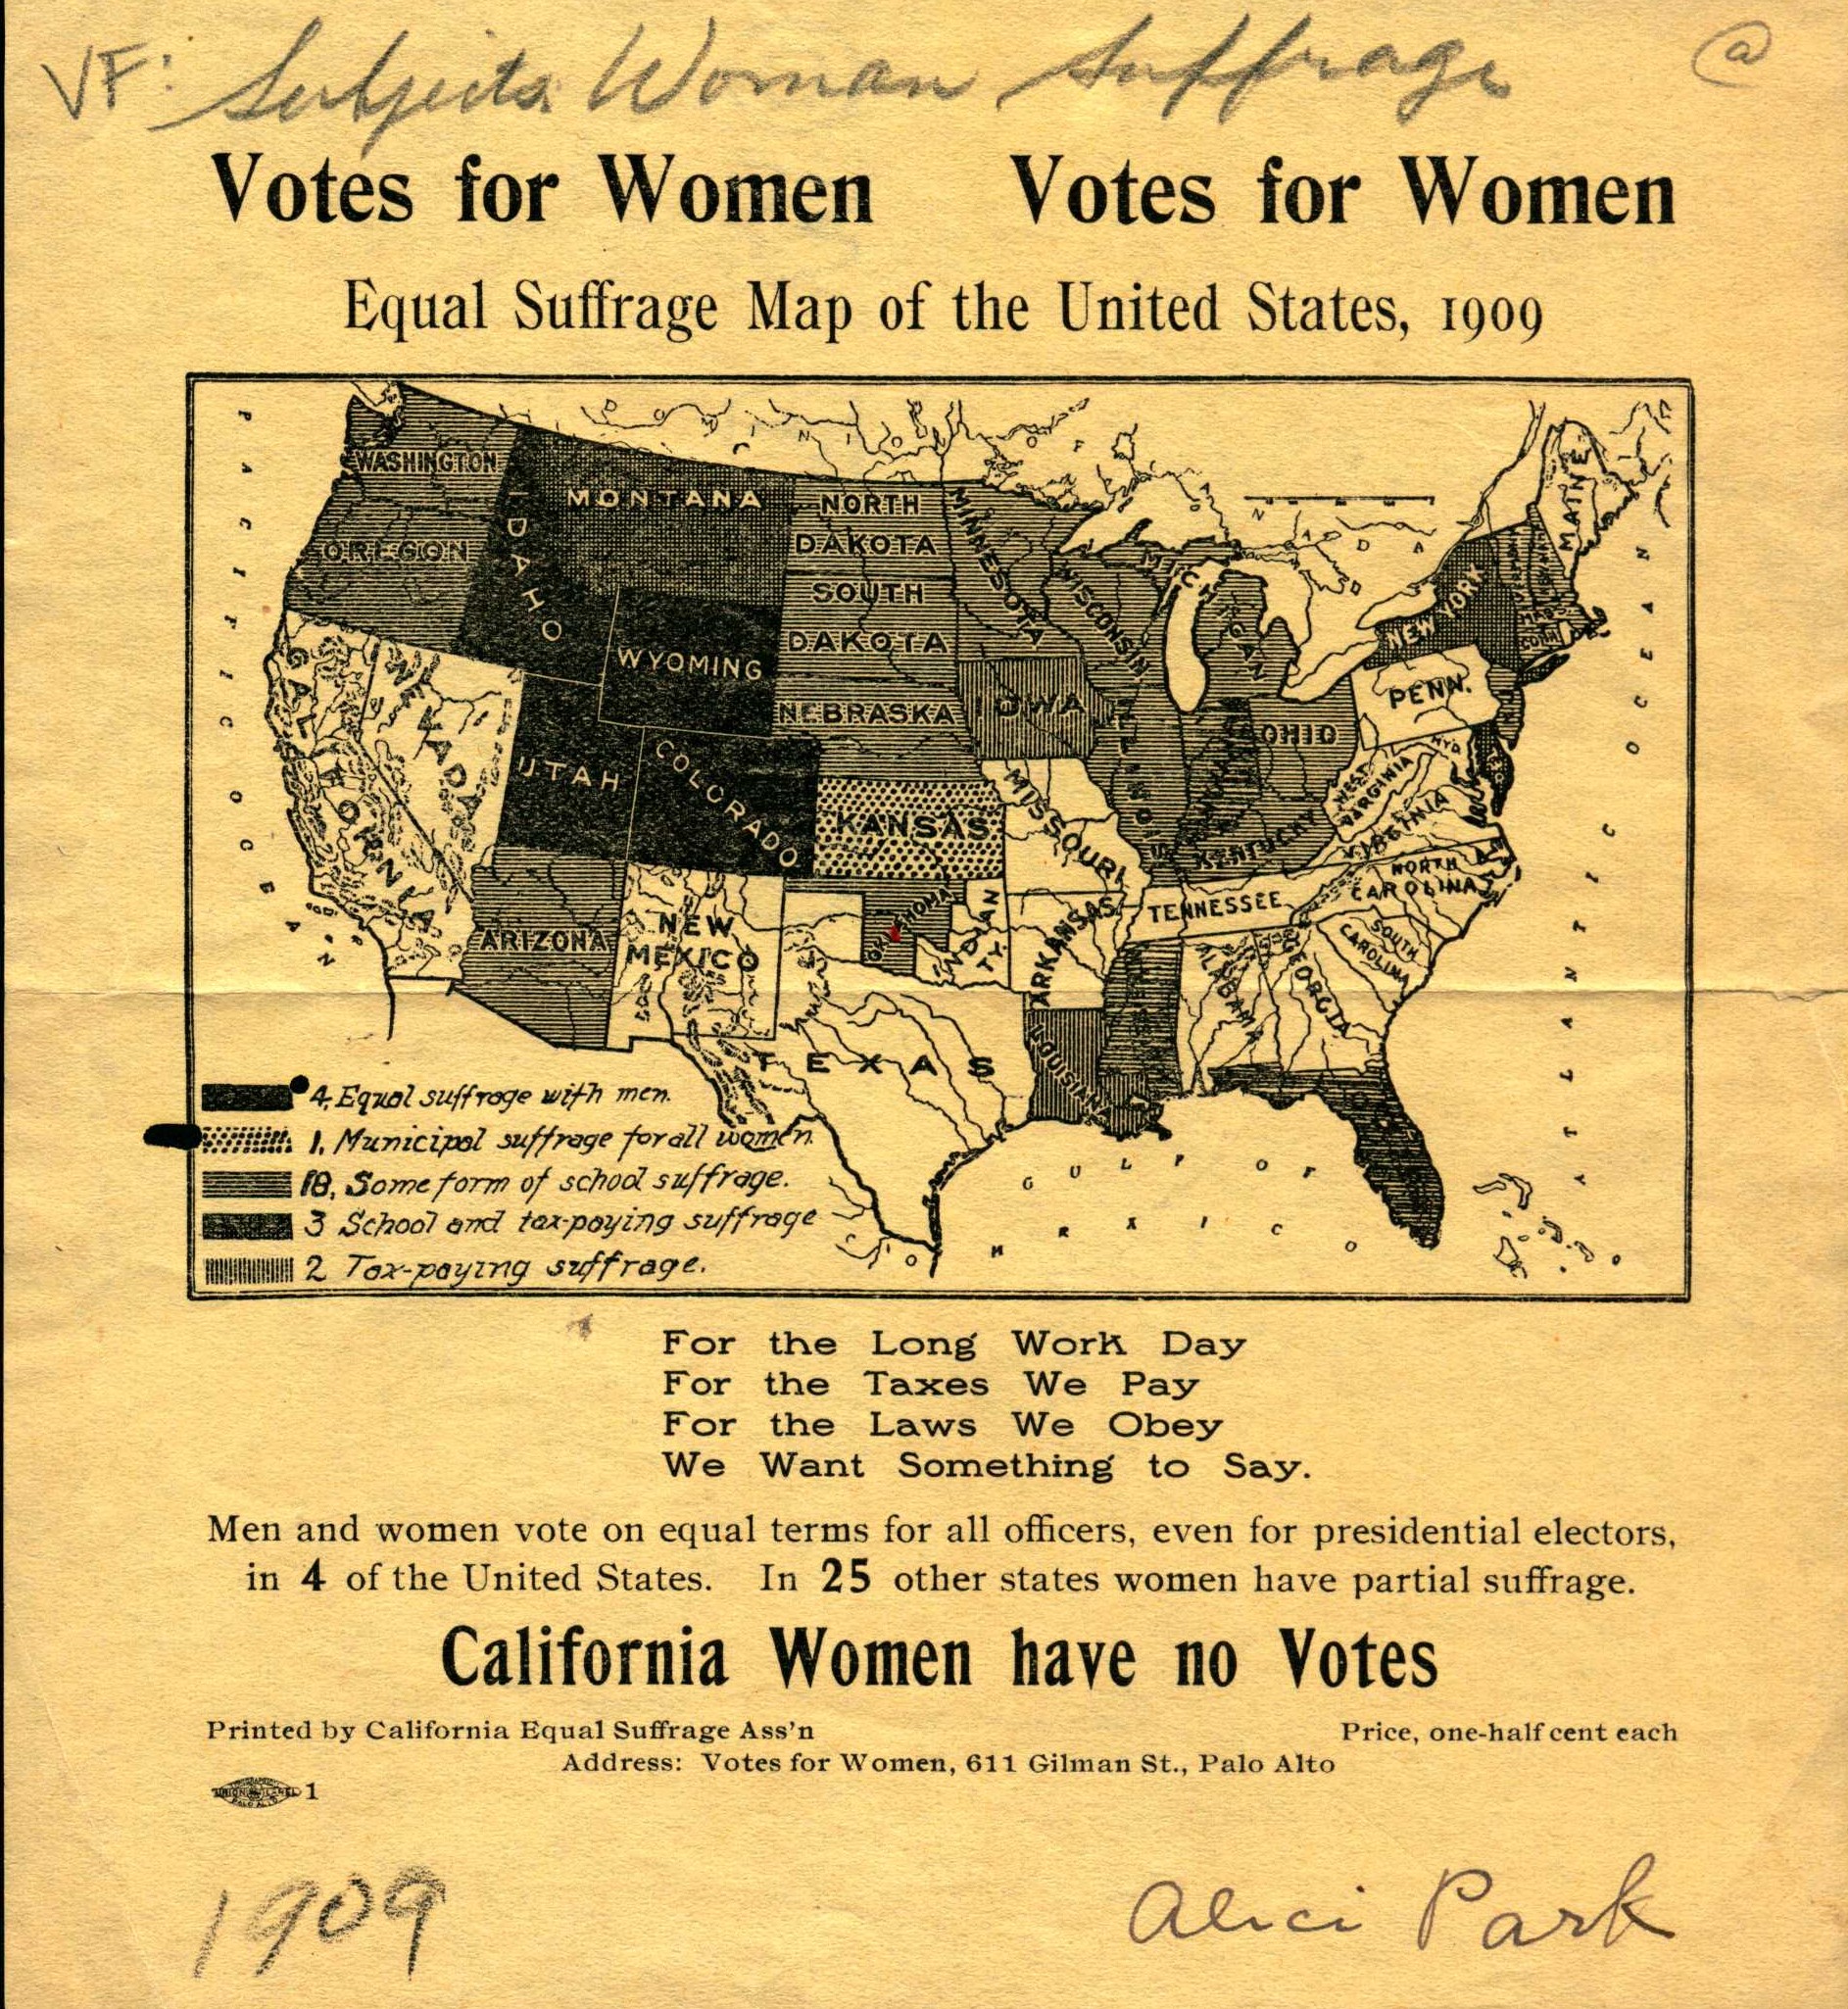 Shows the title information and a map of the United States with information on Women's voting status in every state